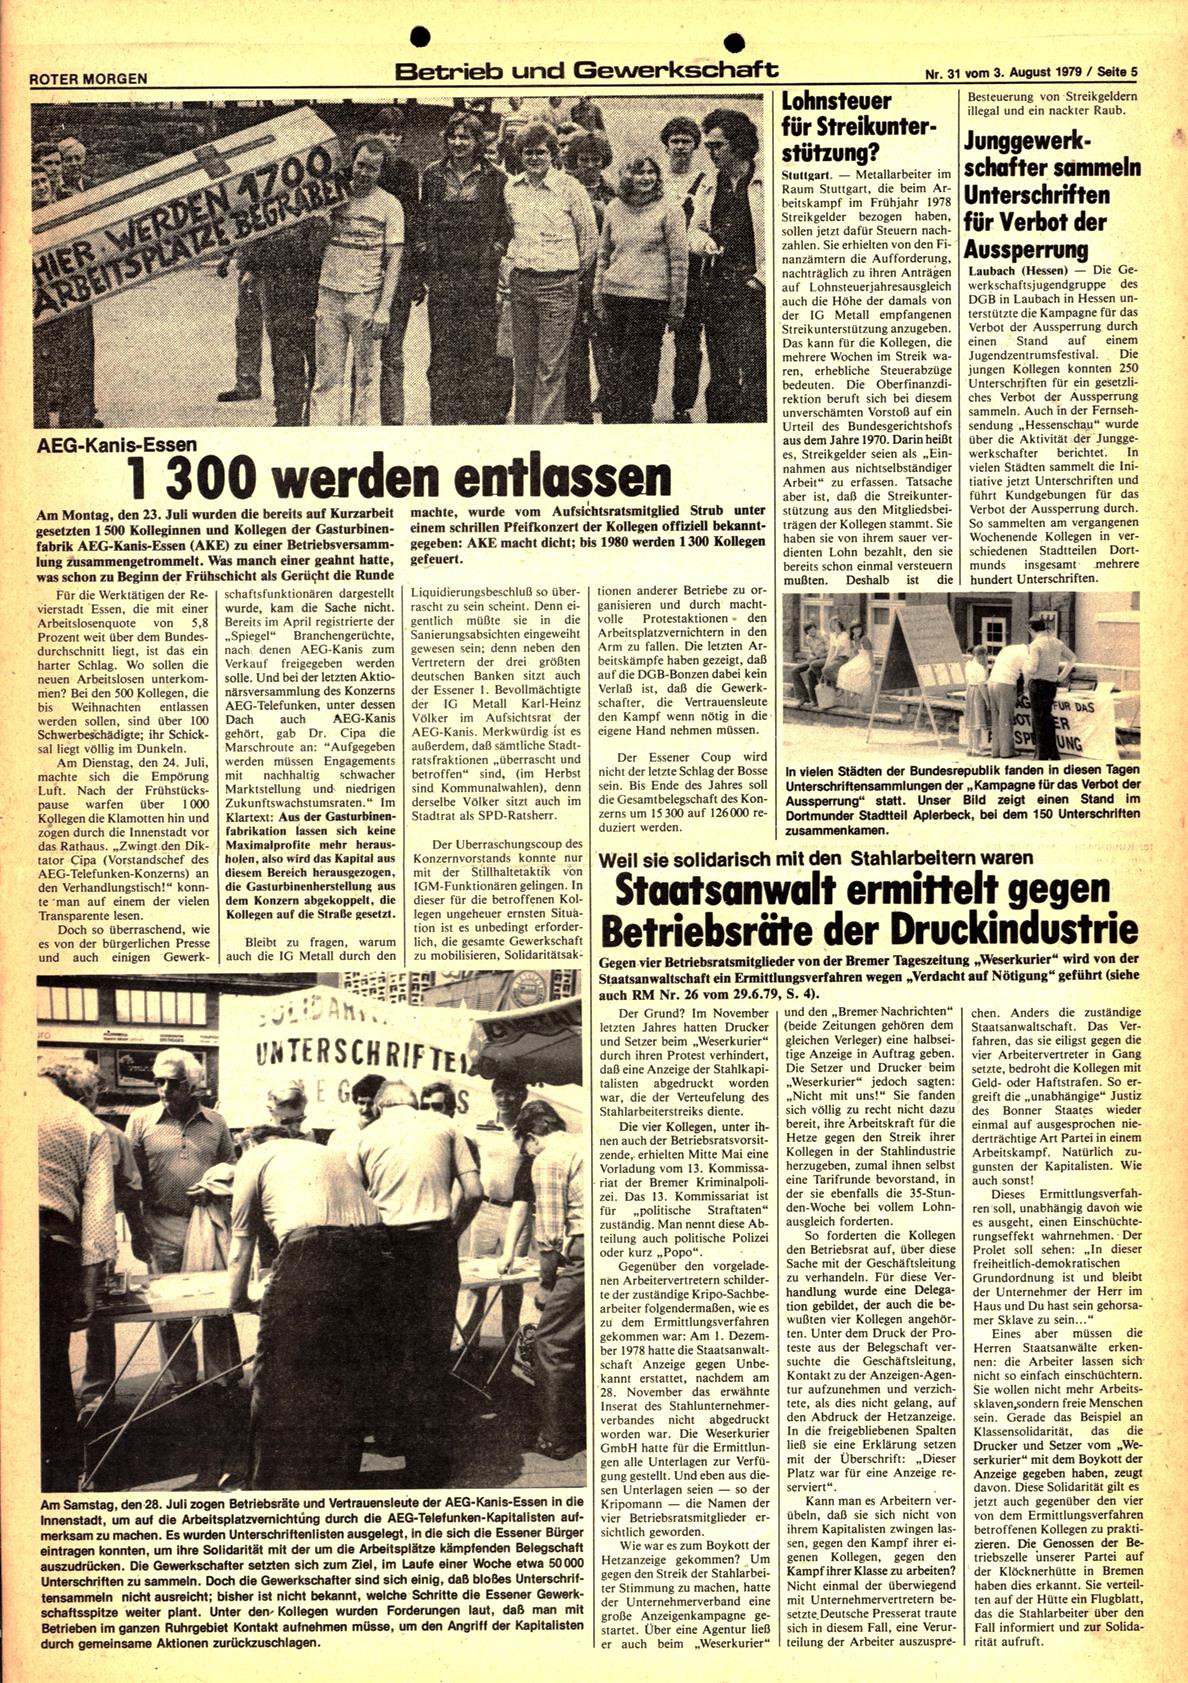 Roter Morgen, 13. Jg., 3. August 1979, Nr. 31, Seite 5